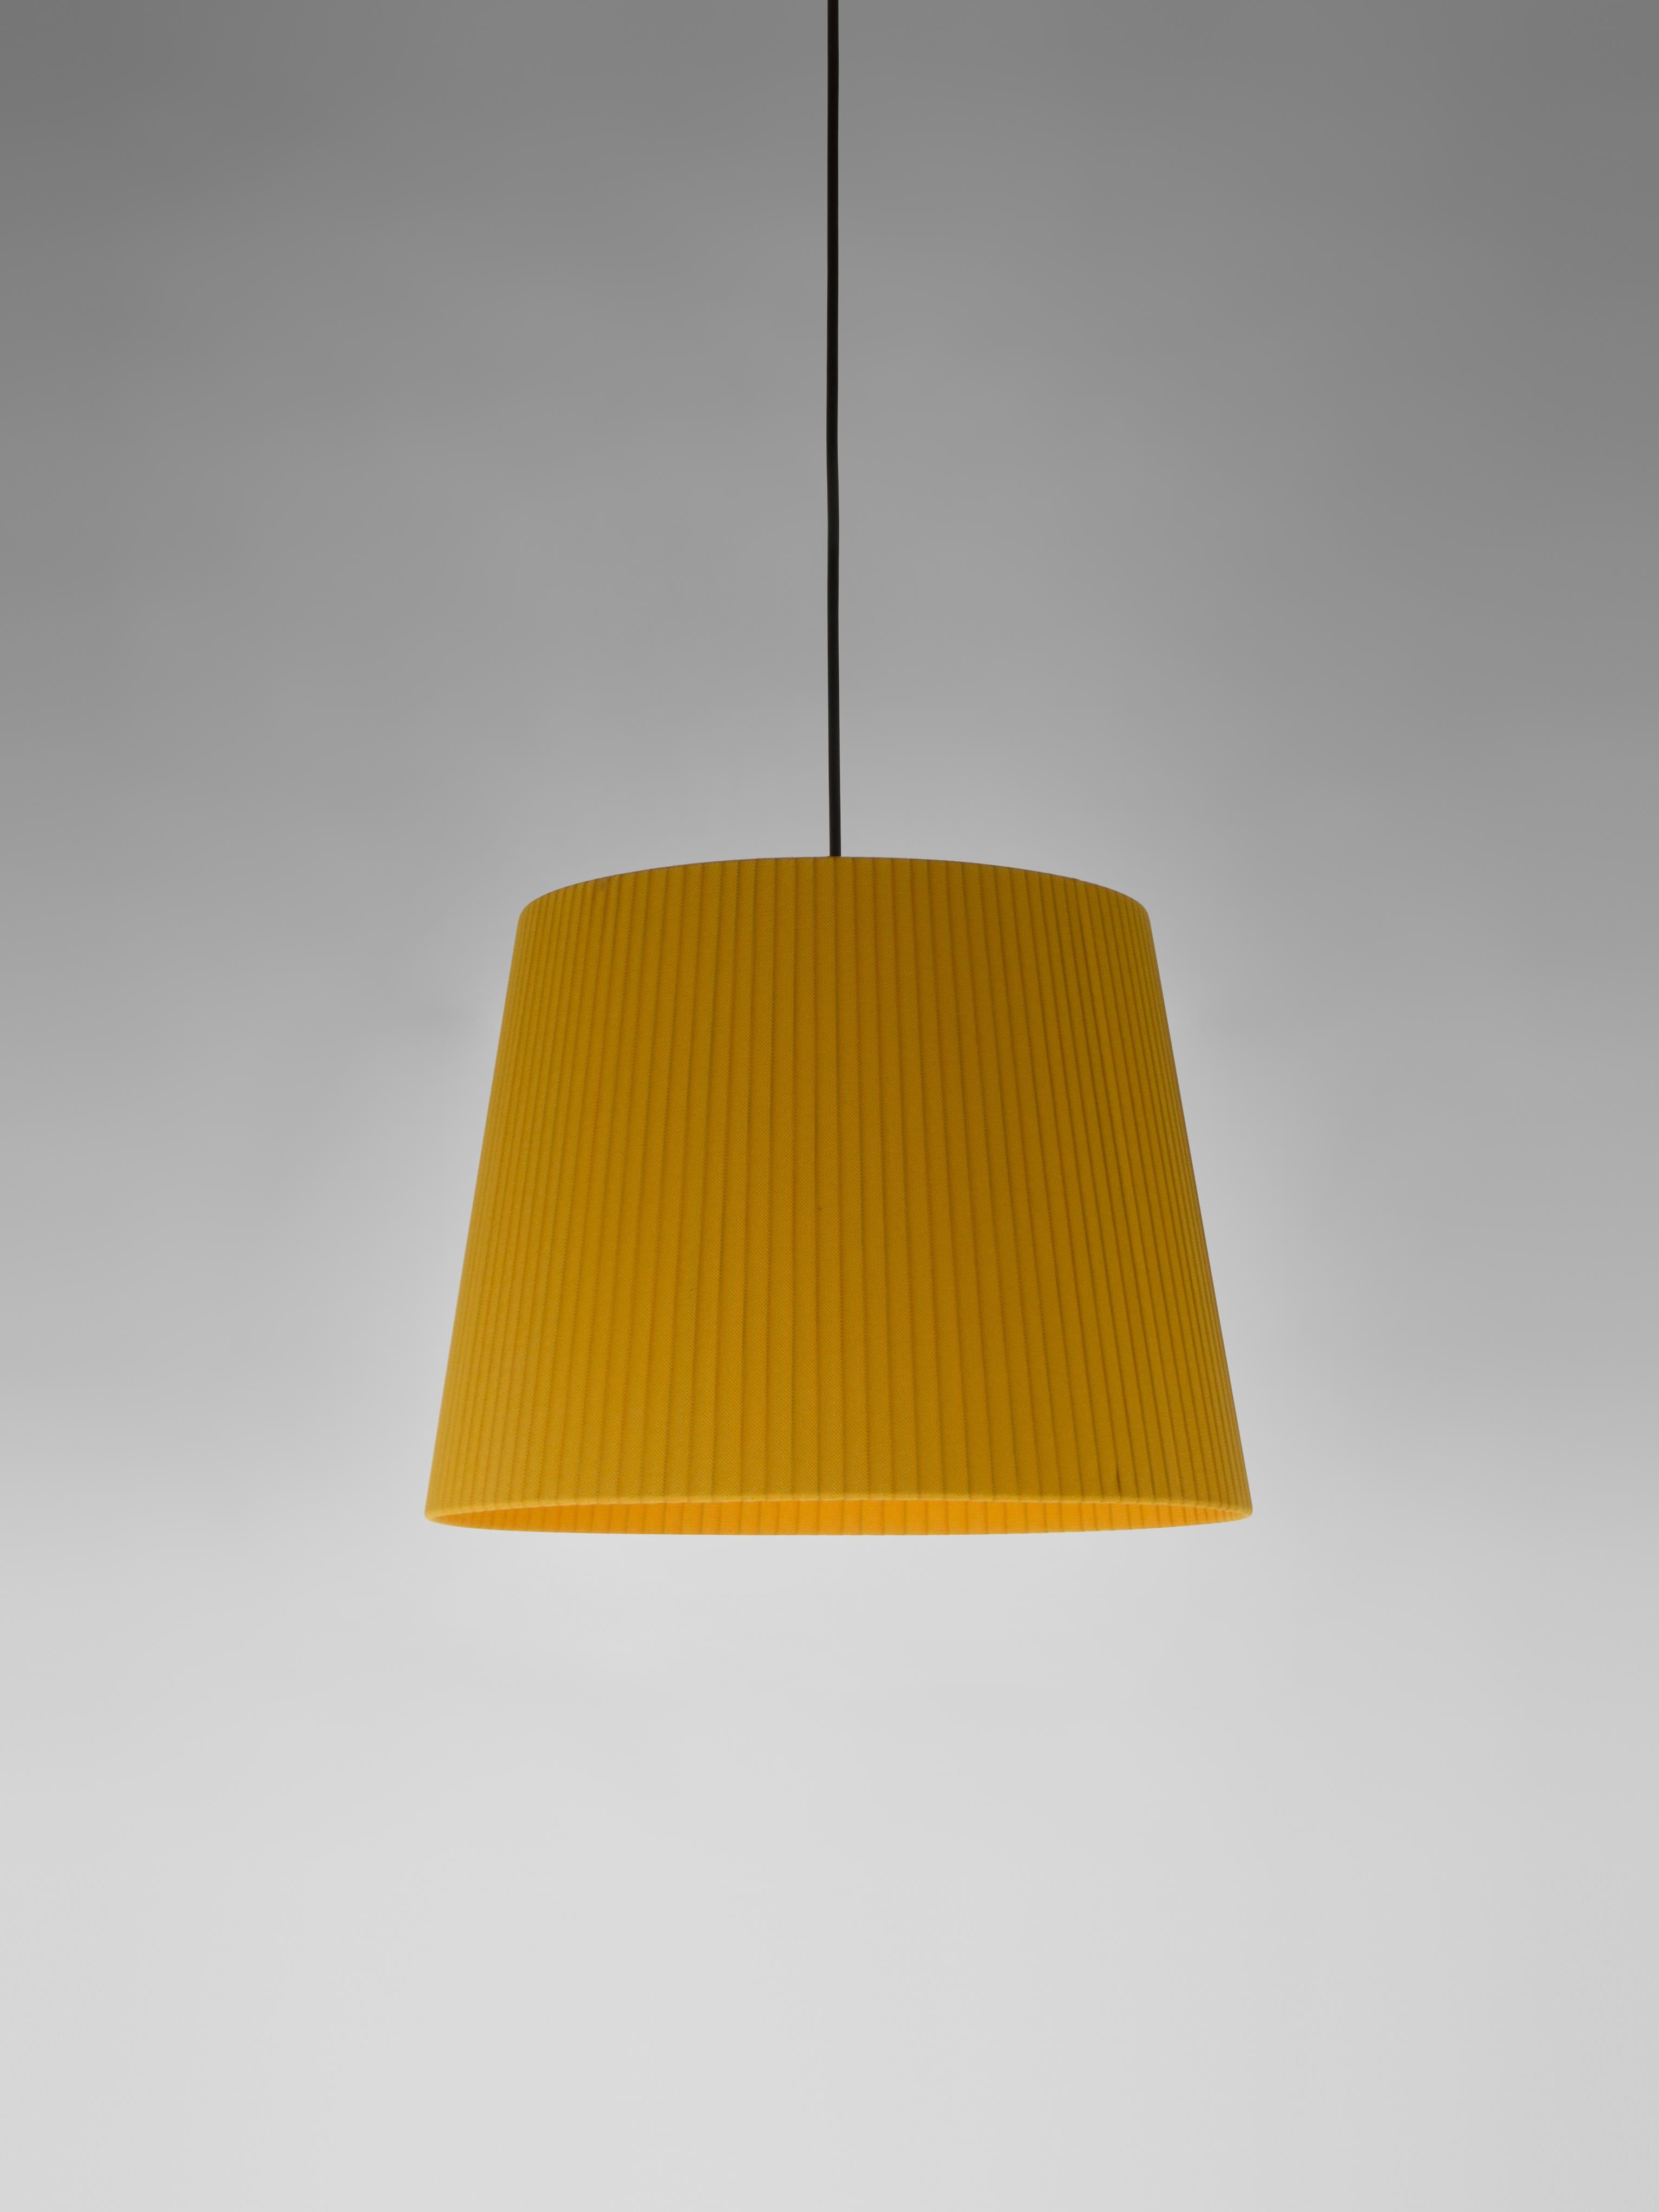 Mustard Sísísí Cónicas GT3 pendant lamp by Santa & Cole.
Dimensions: D 36 x H 27 cm
Materials: Metal, ribbon.
Available in other colors.

The conical shape group has multiple finishes and sizes. It consists of four sizes: PT1, MT1, GT1 and GT3,